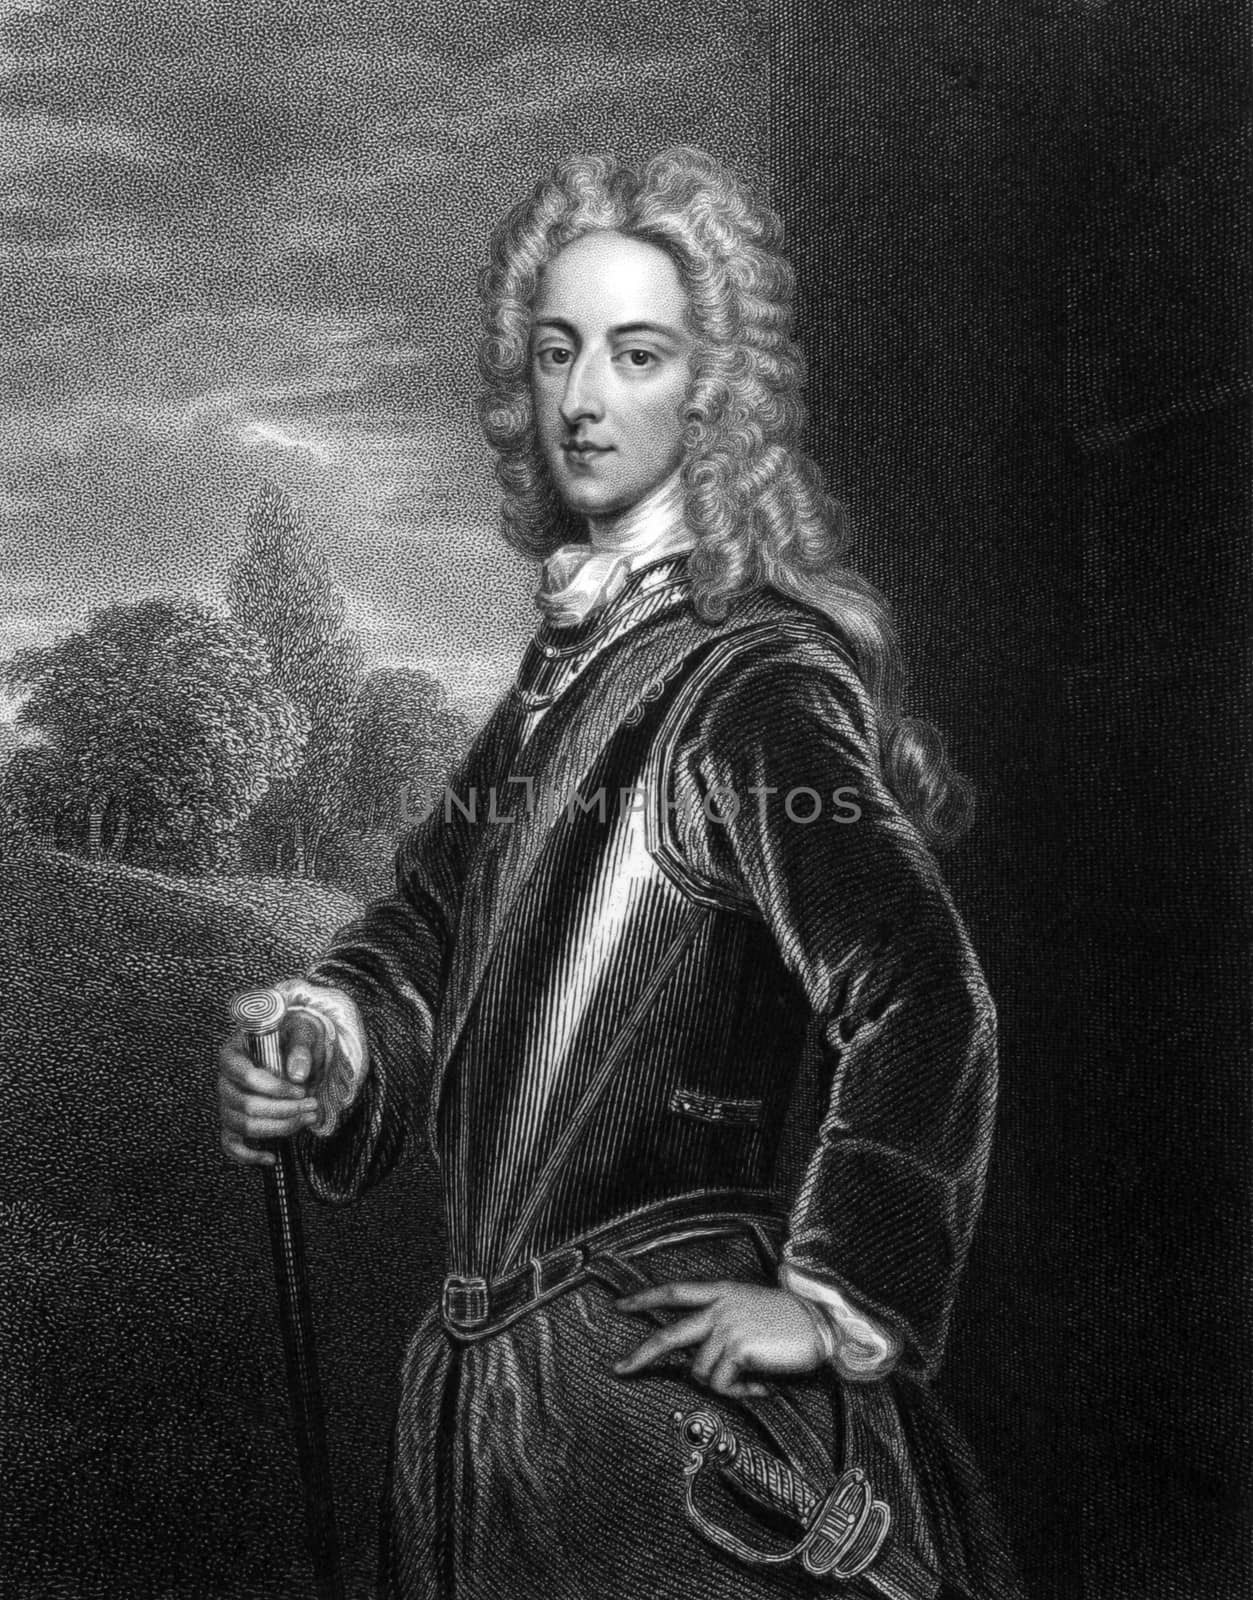 John Montagu, 2nd Duke of Montagu (1690-1749) on engraving from 1830. British peer. Engraved by W.Finden and published in ''Portraits of Illustrious Personages of Great Britain'',UK,1830.